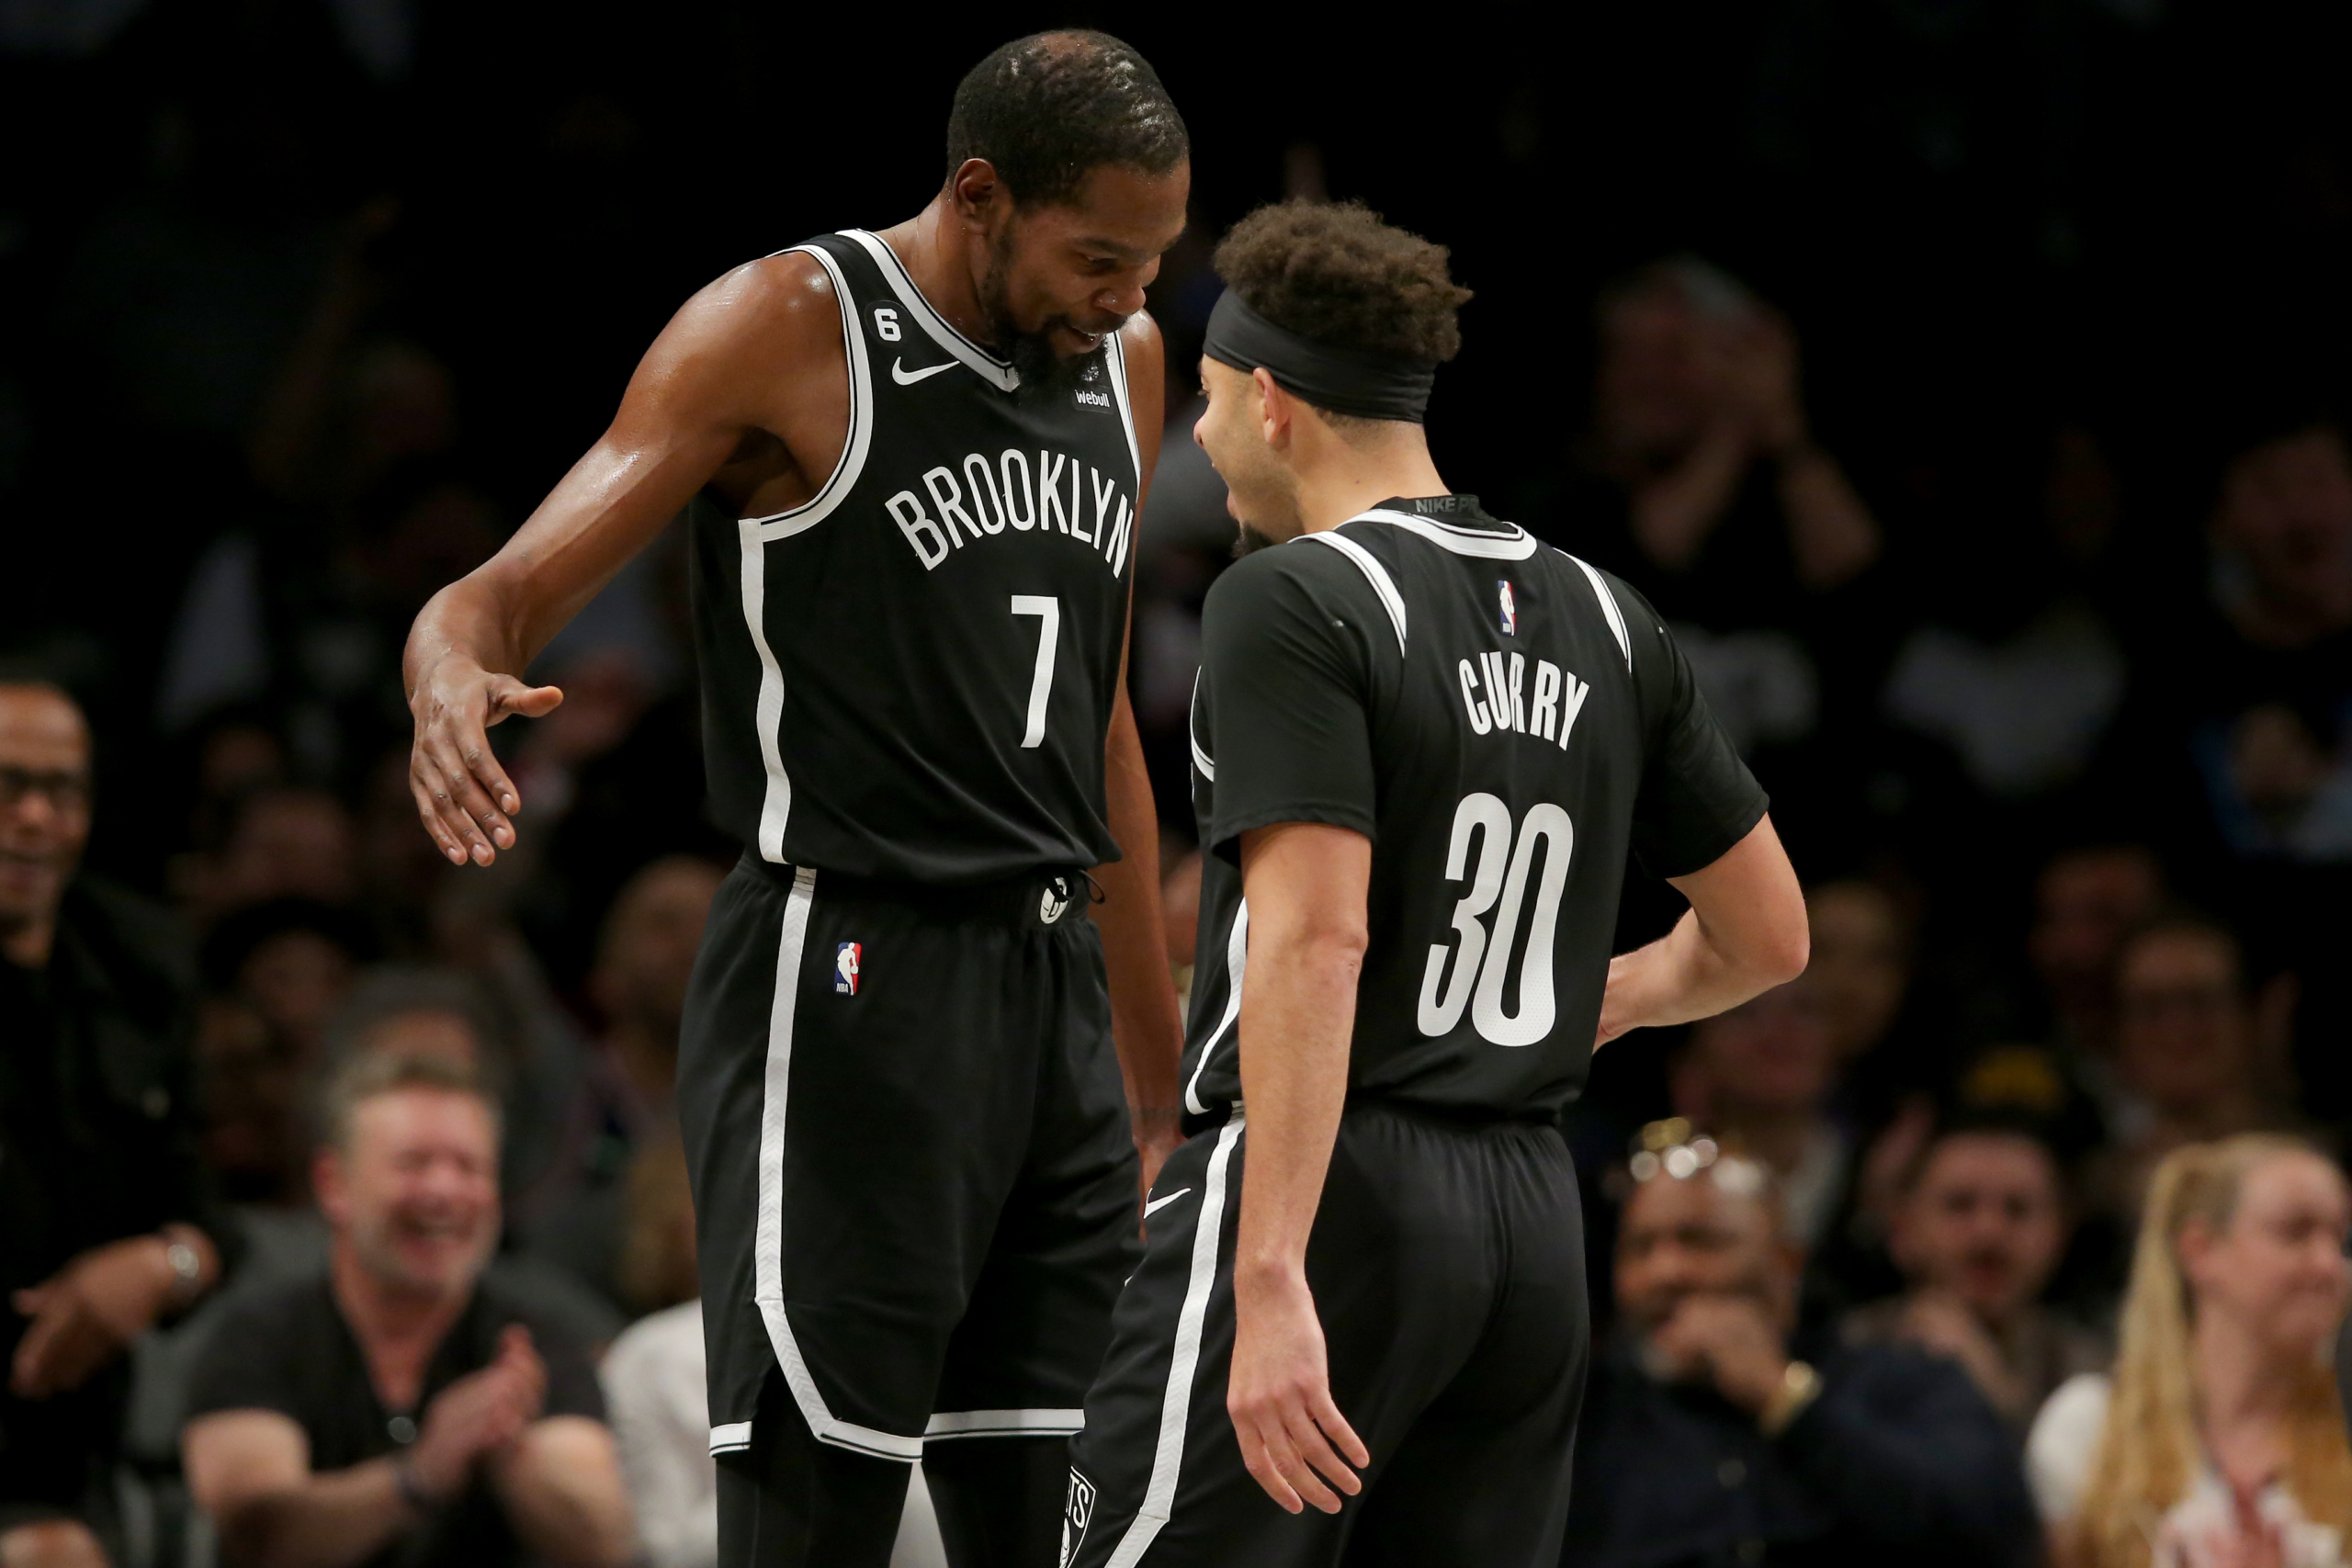 Former Jacque Vaughn players know who Nets are getting